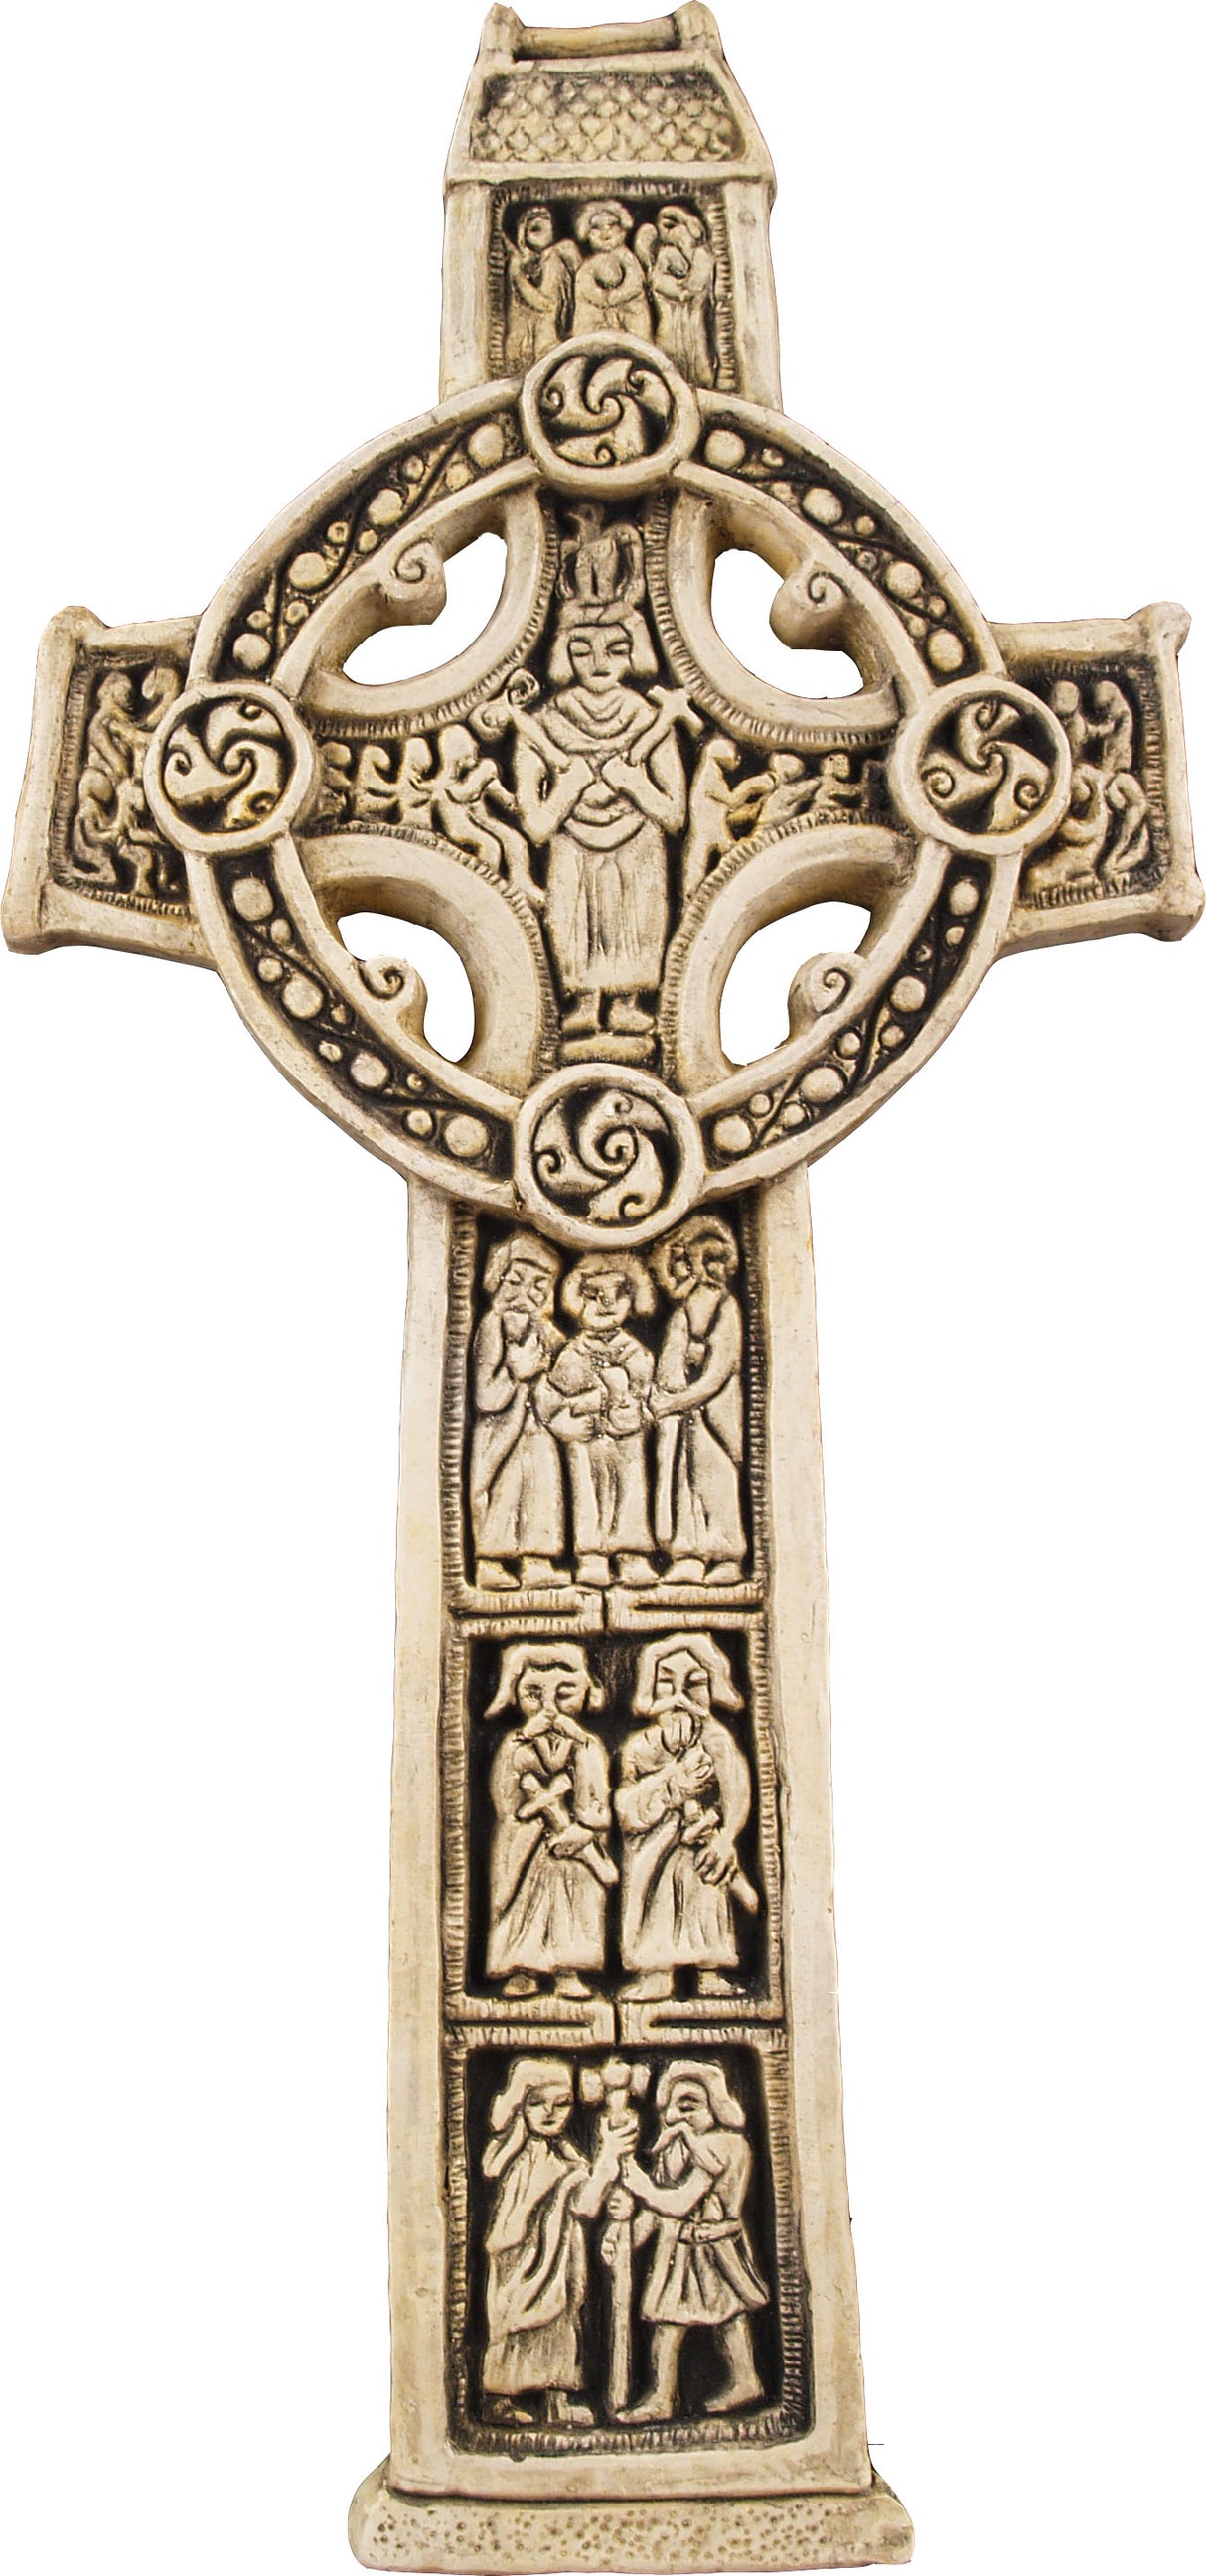 Front image of Scripture Cross by McHarp available at www.realirish.com